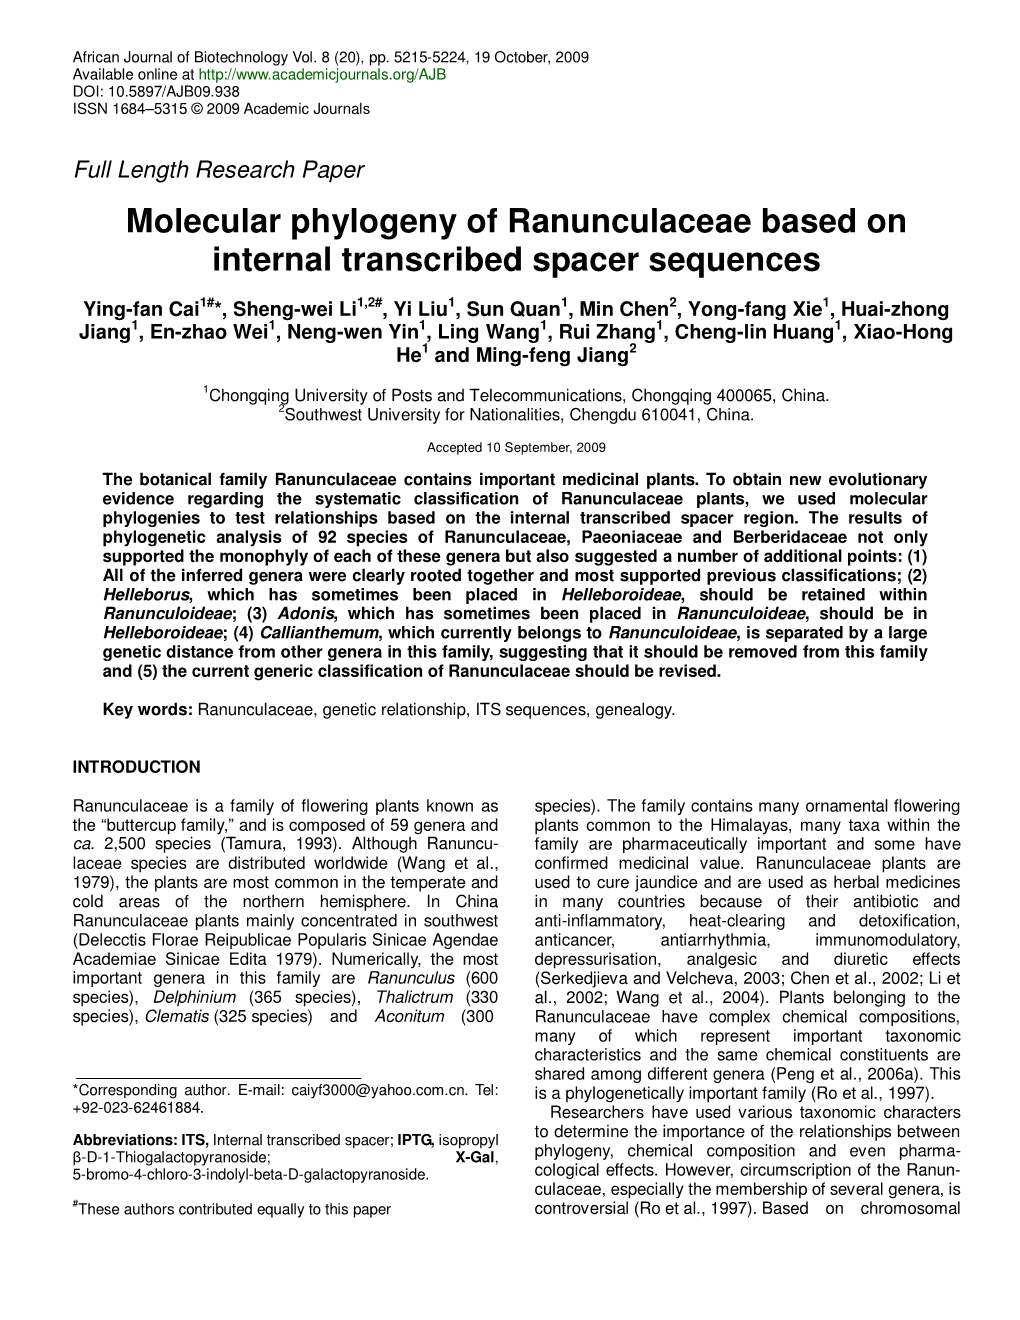 Molecular Phylogeny of Ranunculaceae Based on Internal Transcribed Spacer Sequences